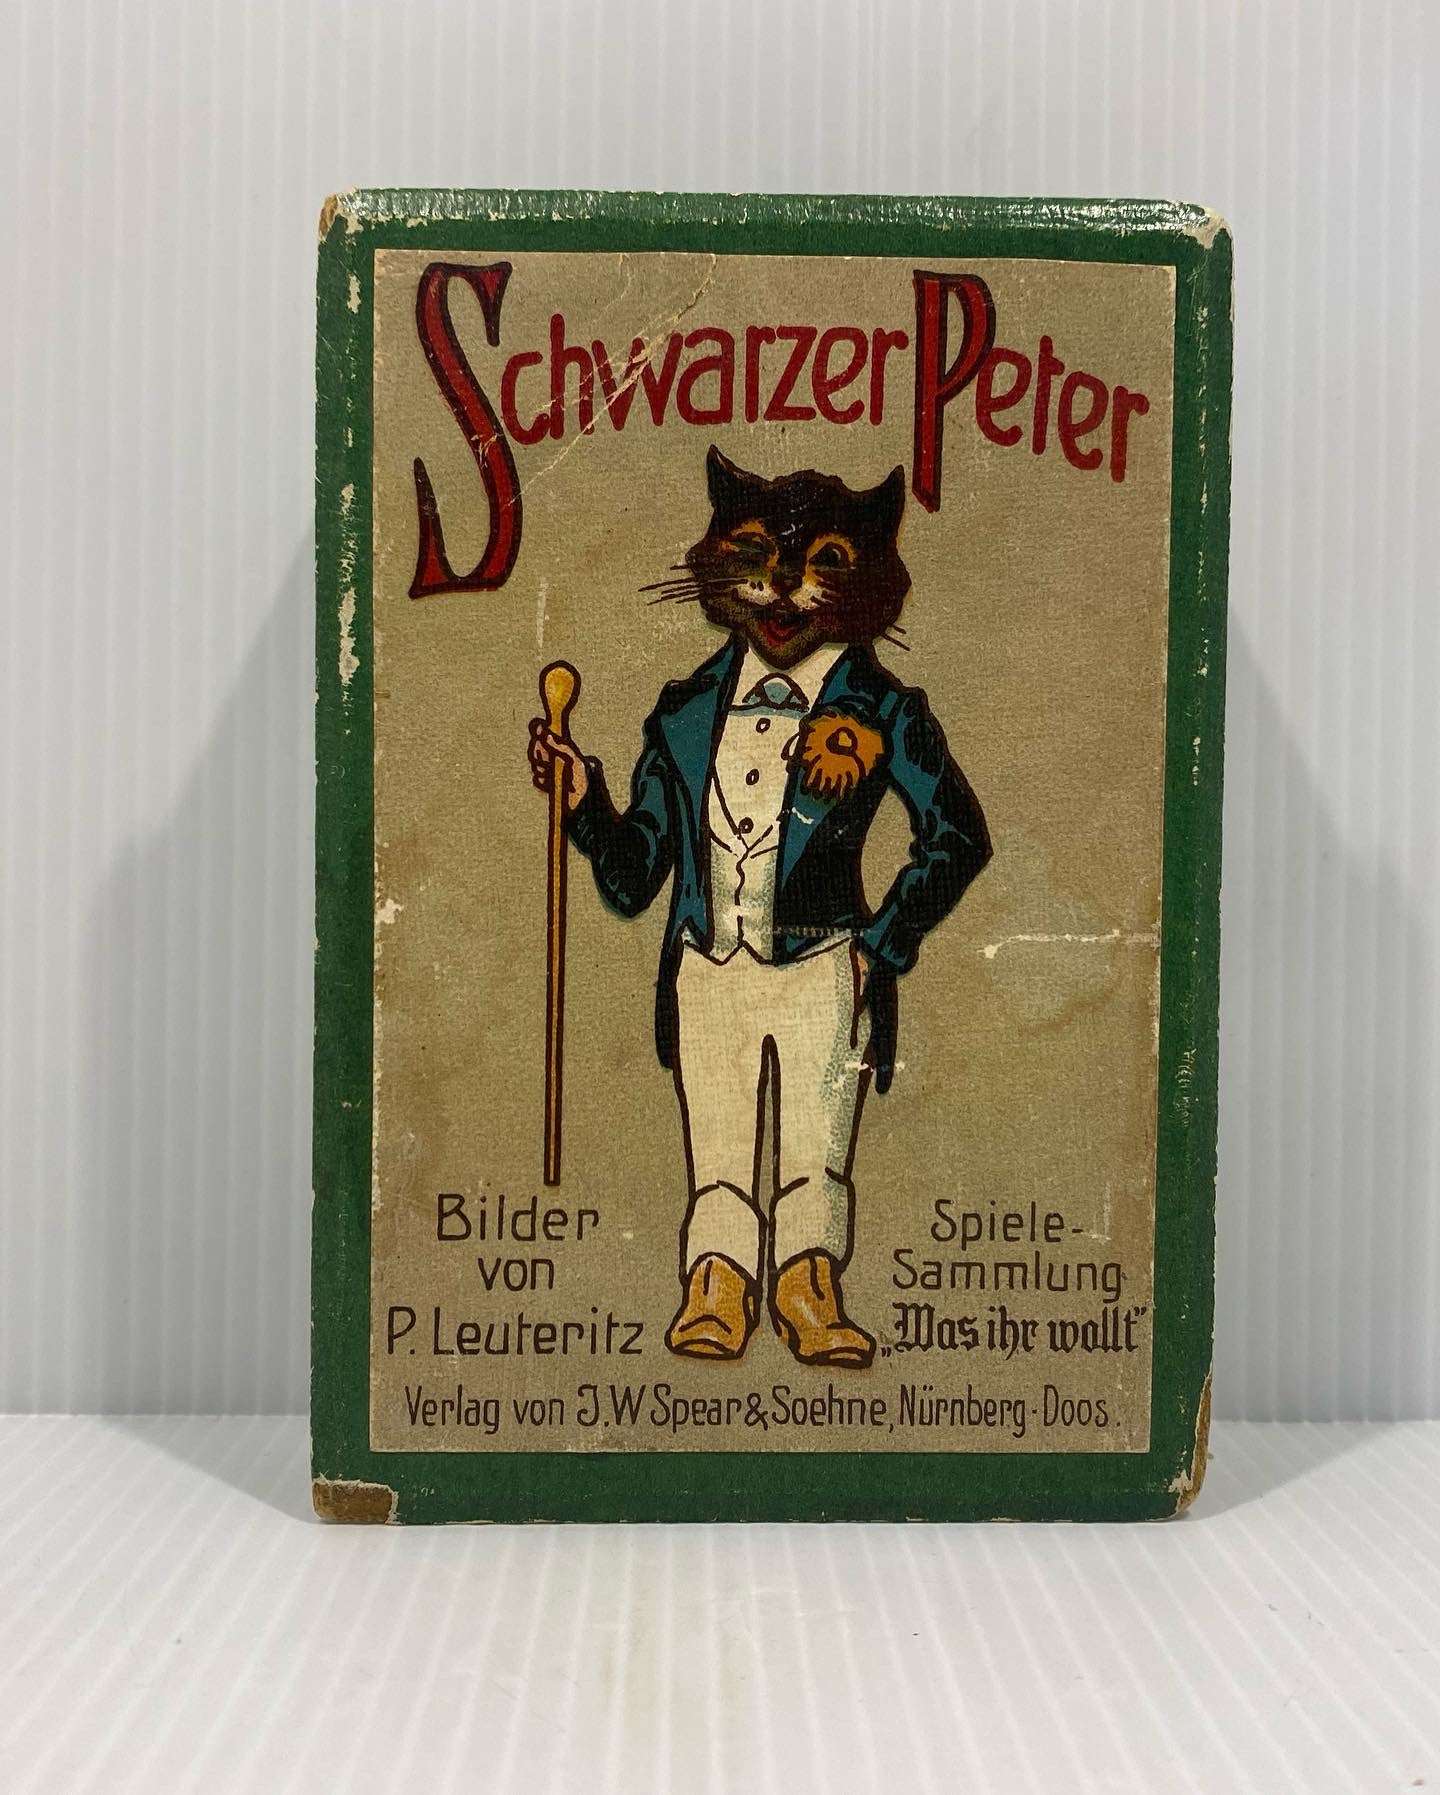 Antique German Playing Cards, Schwarzer Peter playing cards. Forty-five cards and instructions (German language) with original Box.